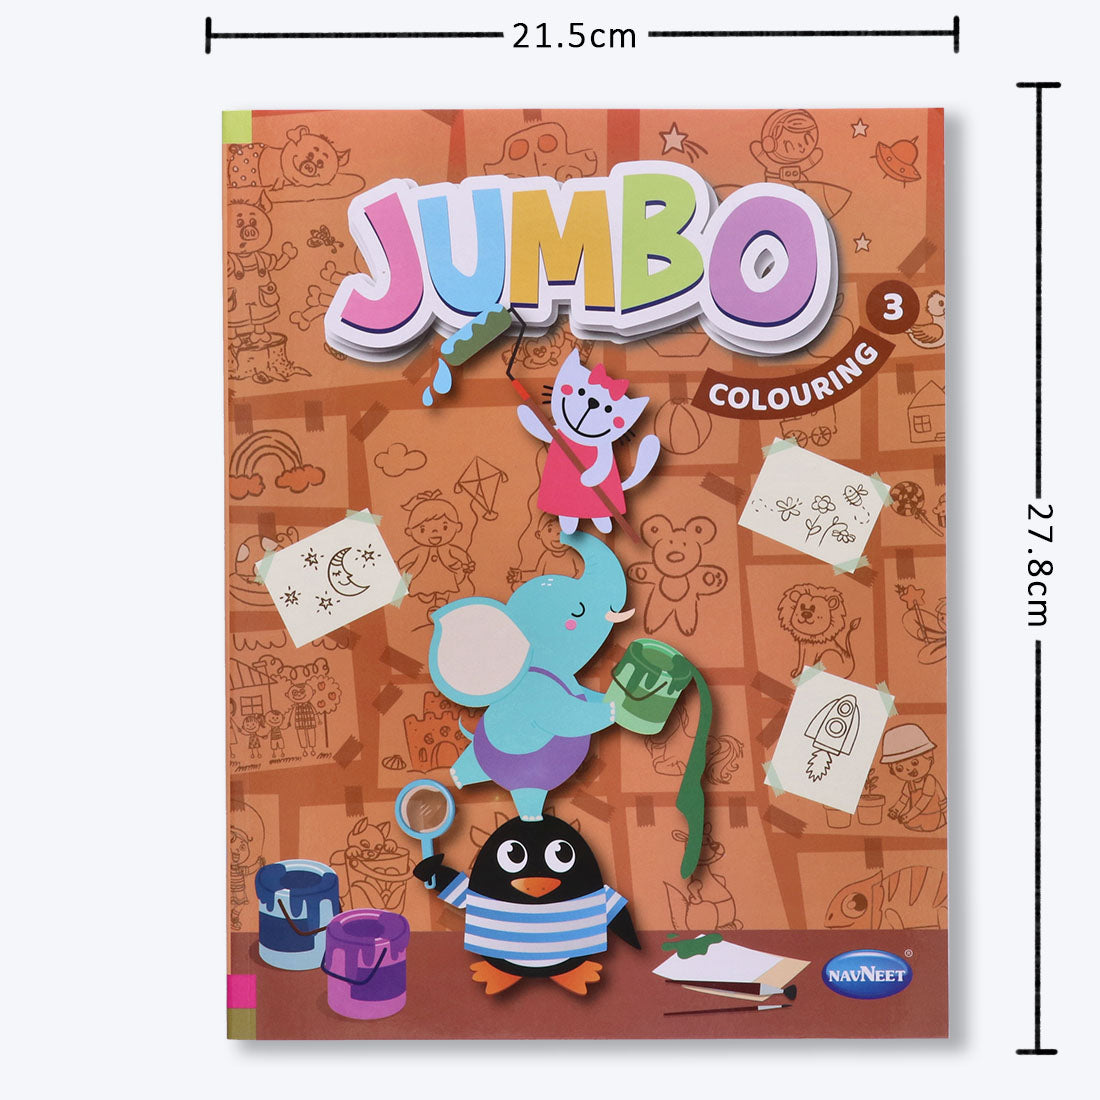 Navneet's Jumbo Colouring Book - III can be used with colour pencils or crayons for age group.